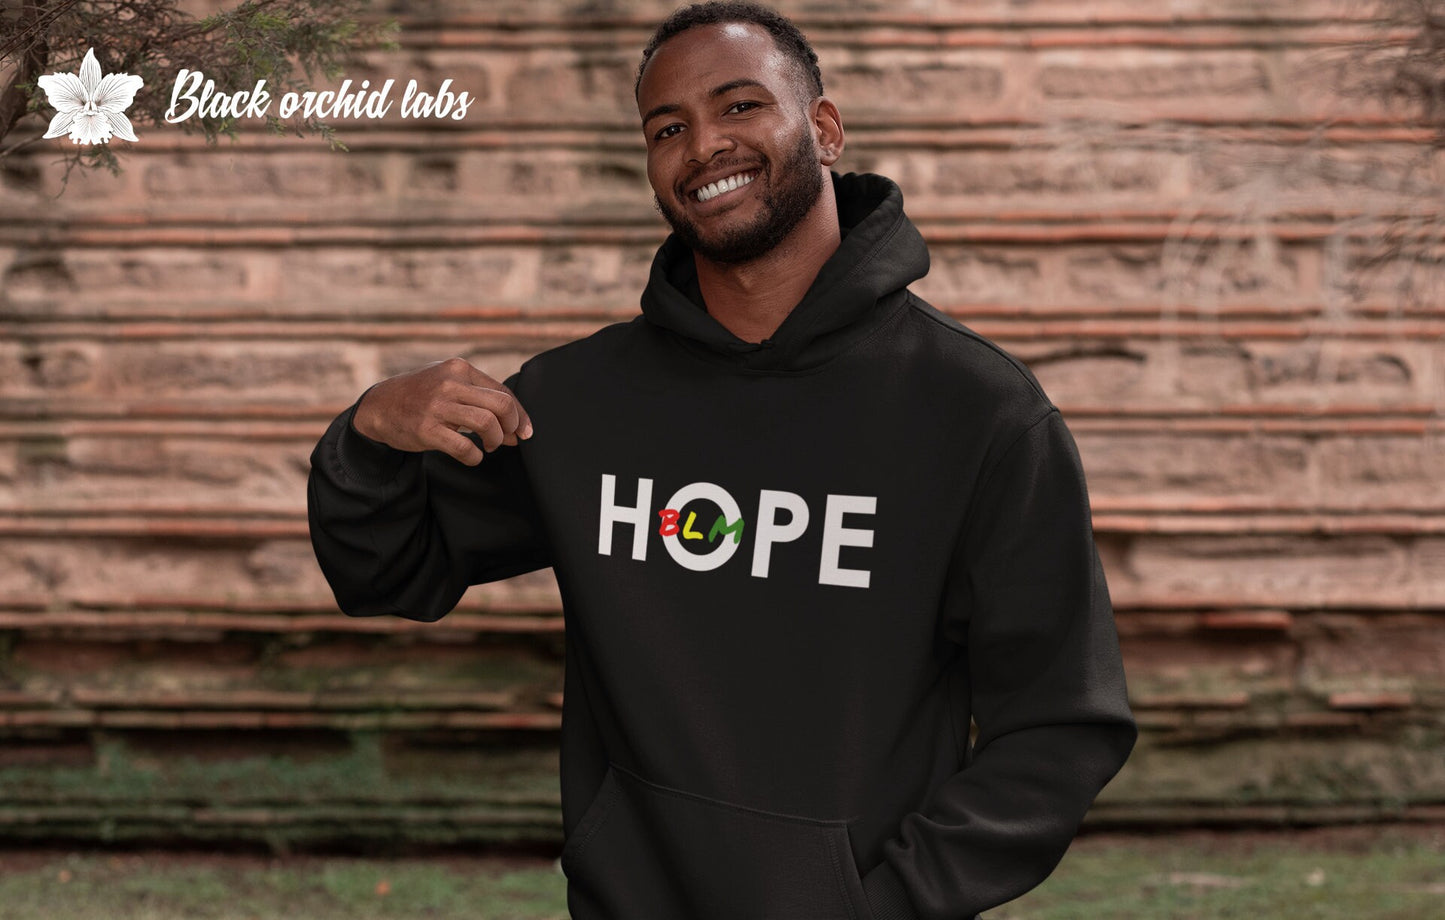 Hope, Black Lives Matter Tote, T-shirt, Hoodie, or Tank, BLM, March shirt, Ally Hoodie